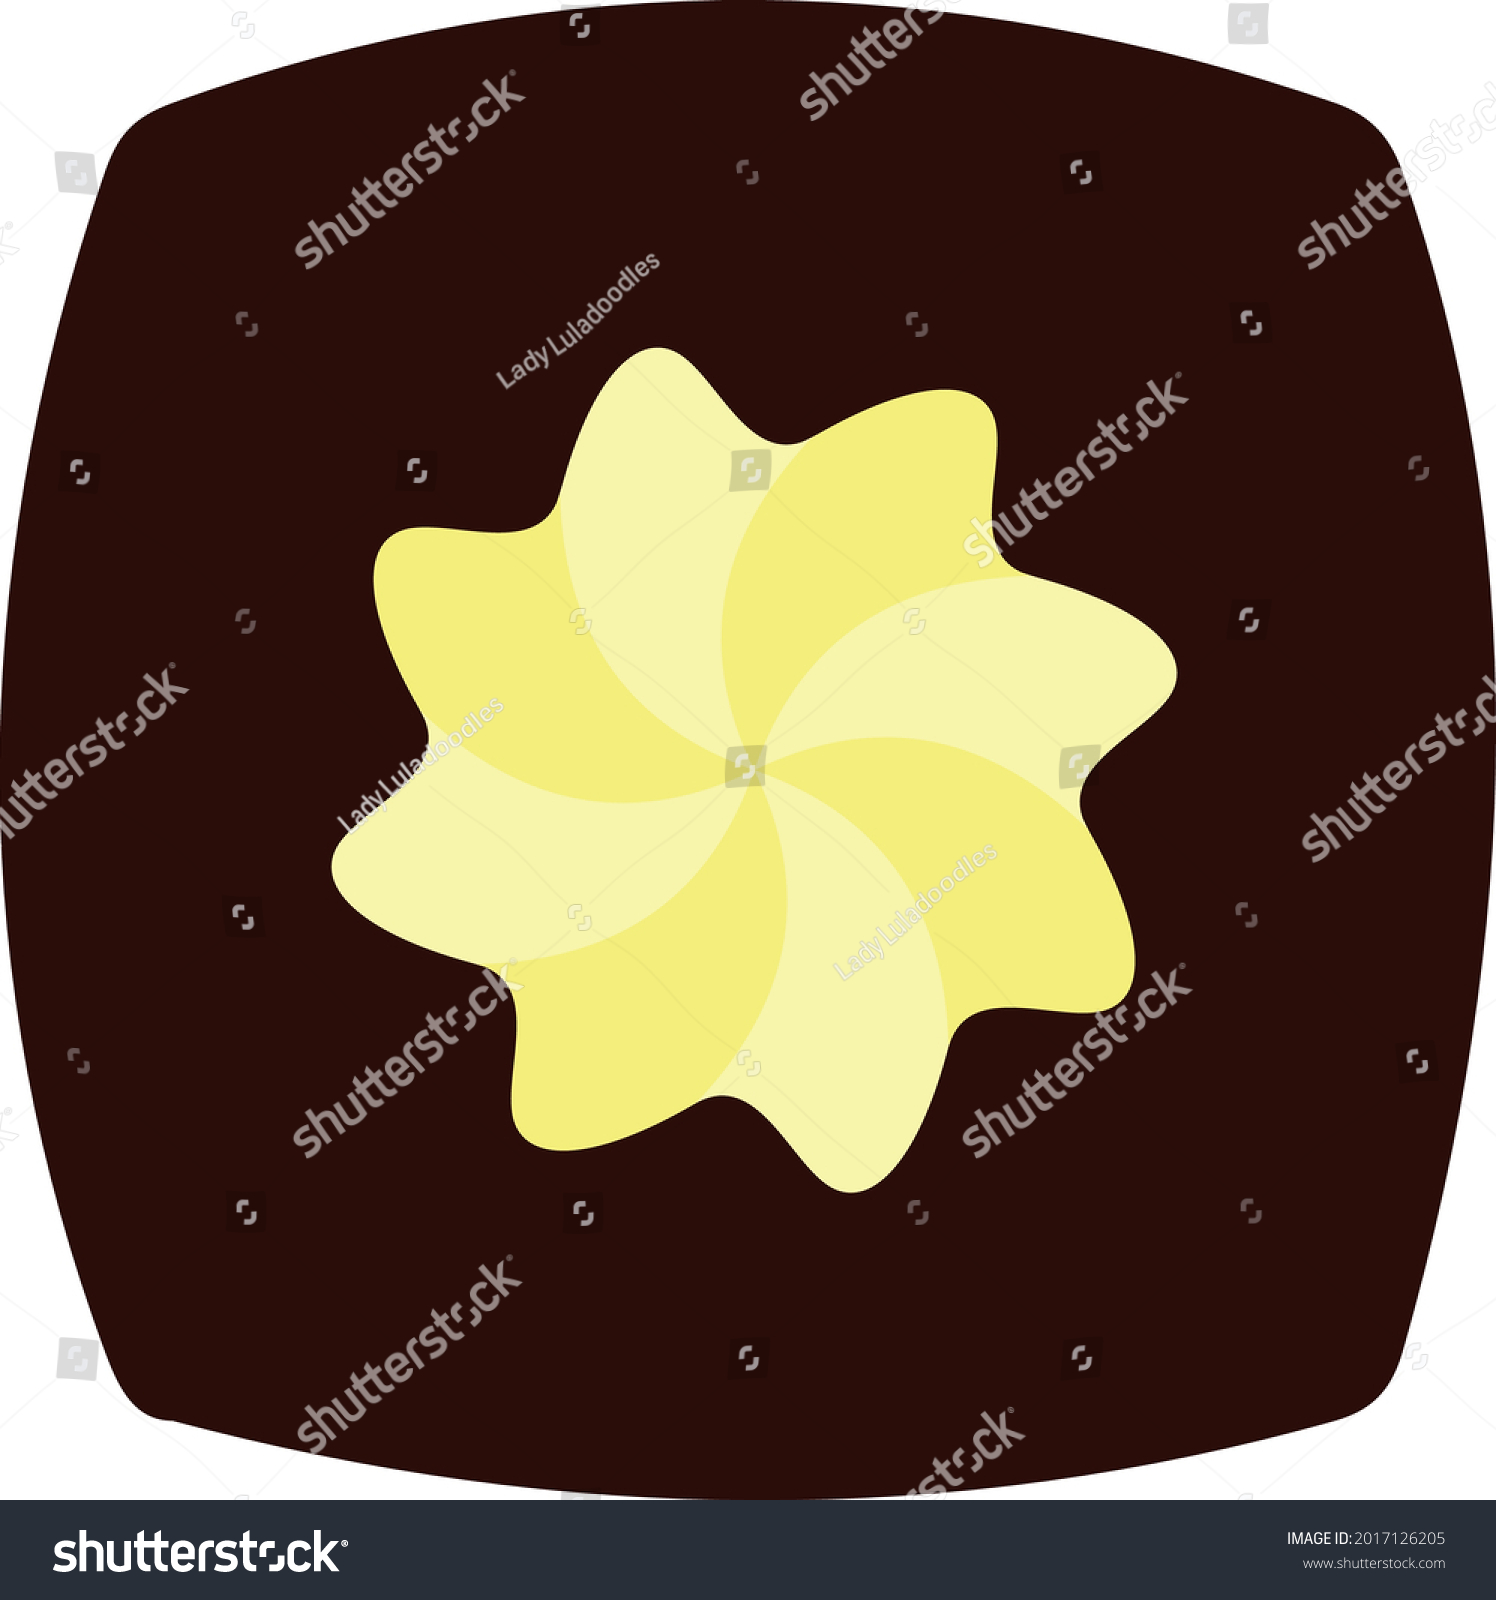 SVG of Dark brown rounded square Chocolate candy with two toned cream and yellow piped star decoration. Layered confectionery SVG svg